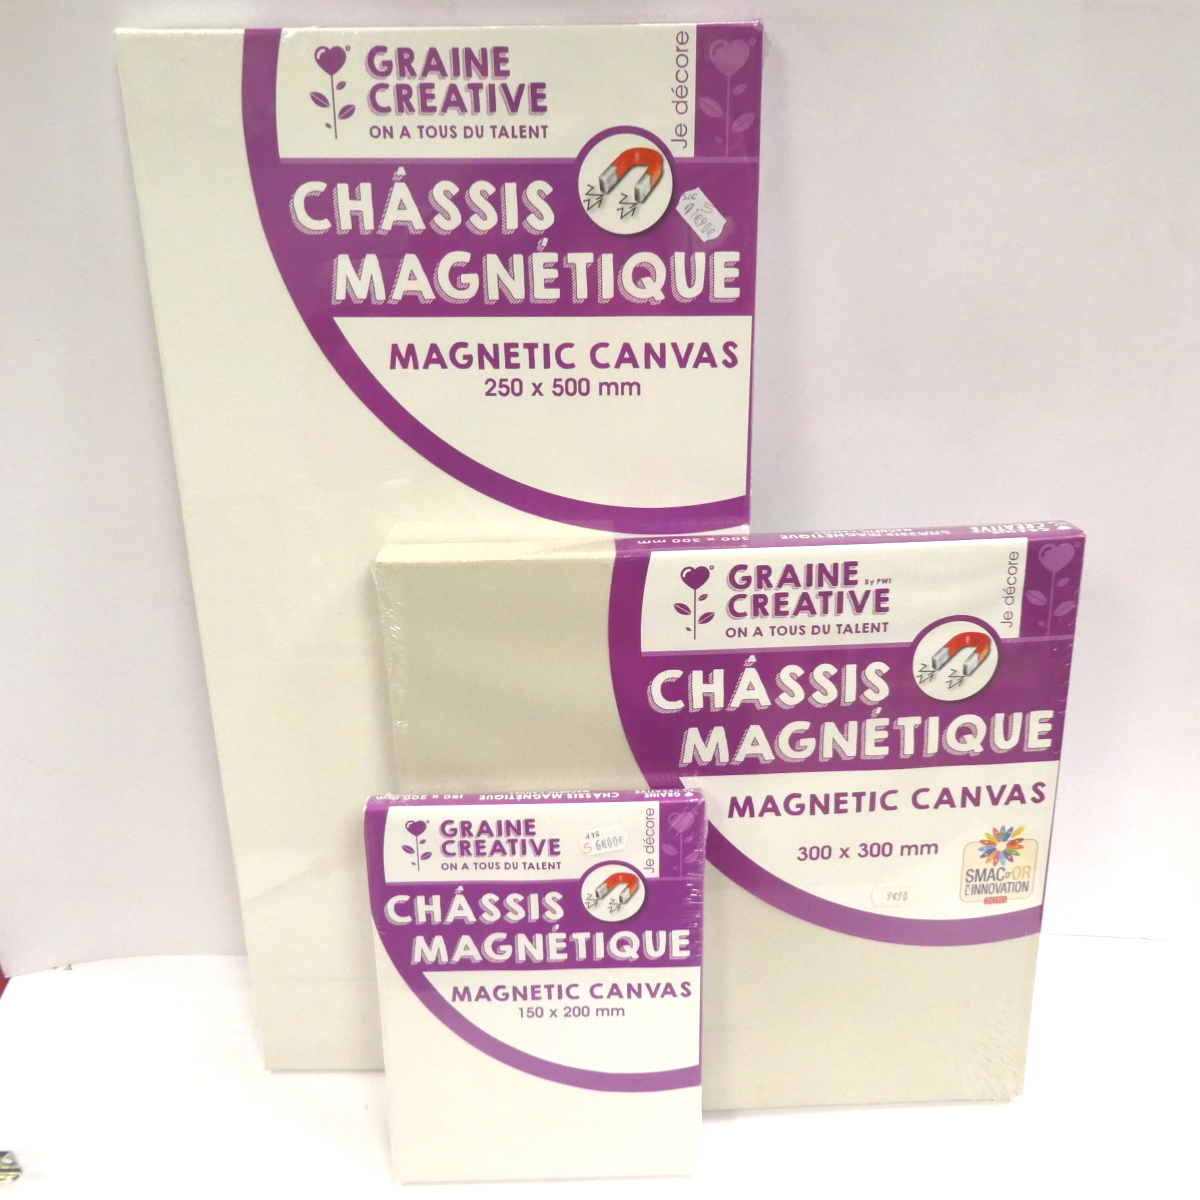 chassis-magnetiques-GRAINE-CREATIVE-zoom